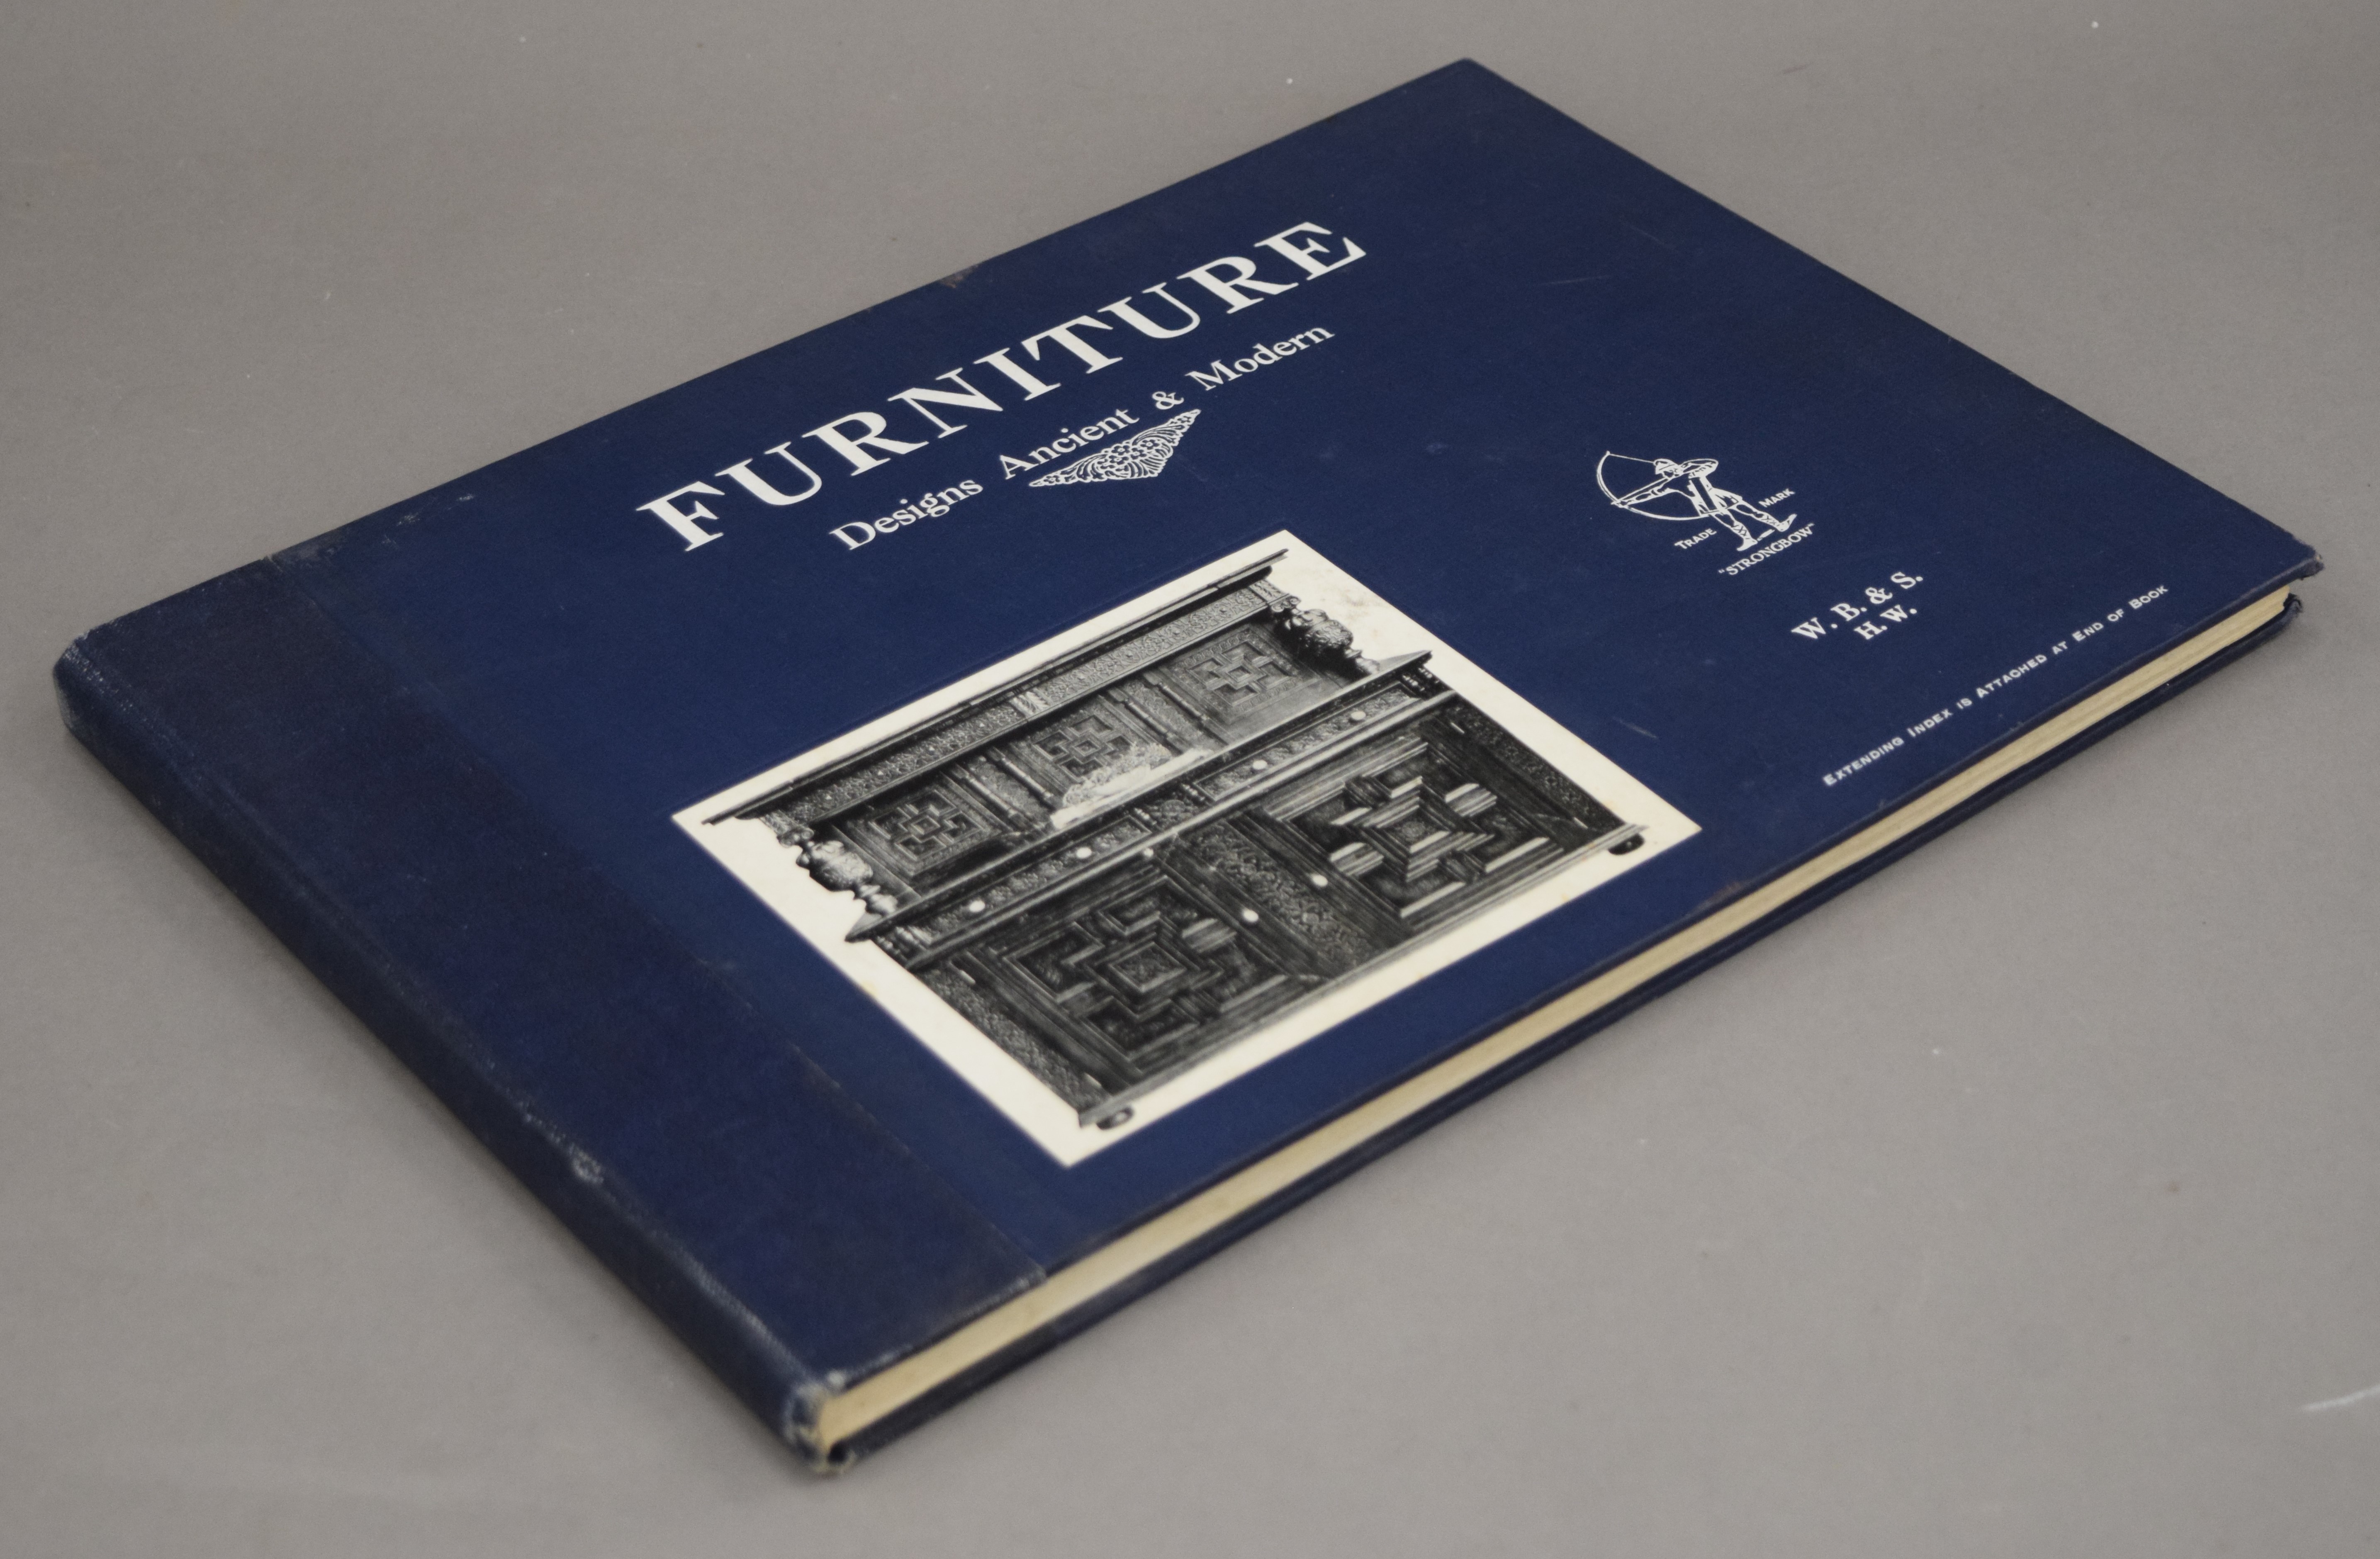 A Furniture Designs Ancient and Modern catalogue.